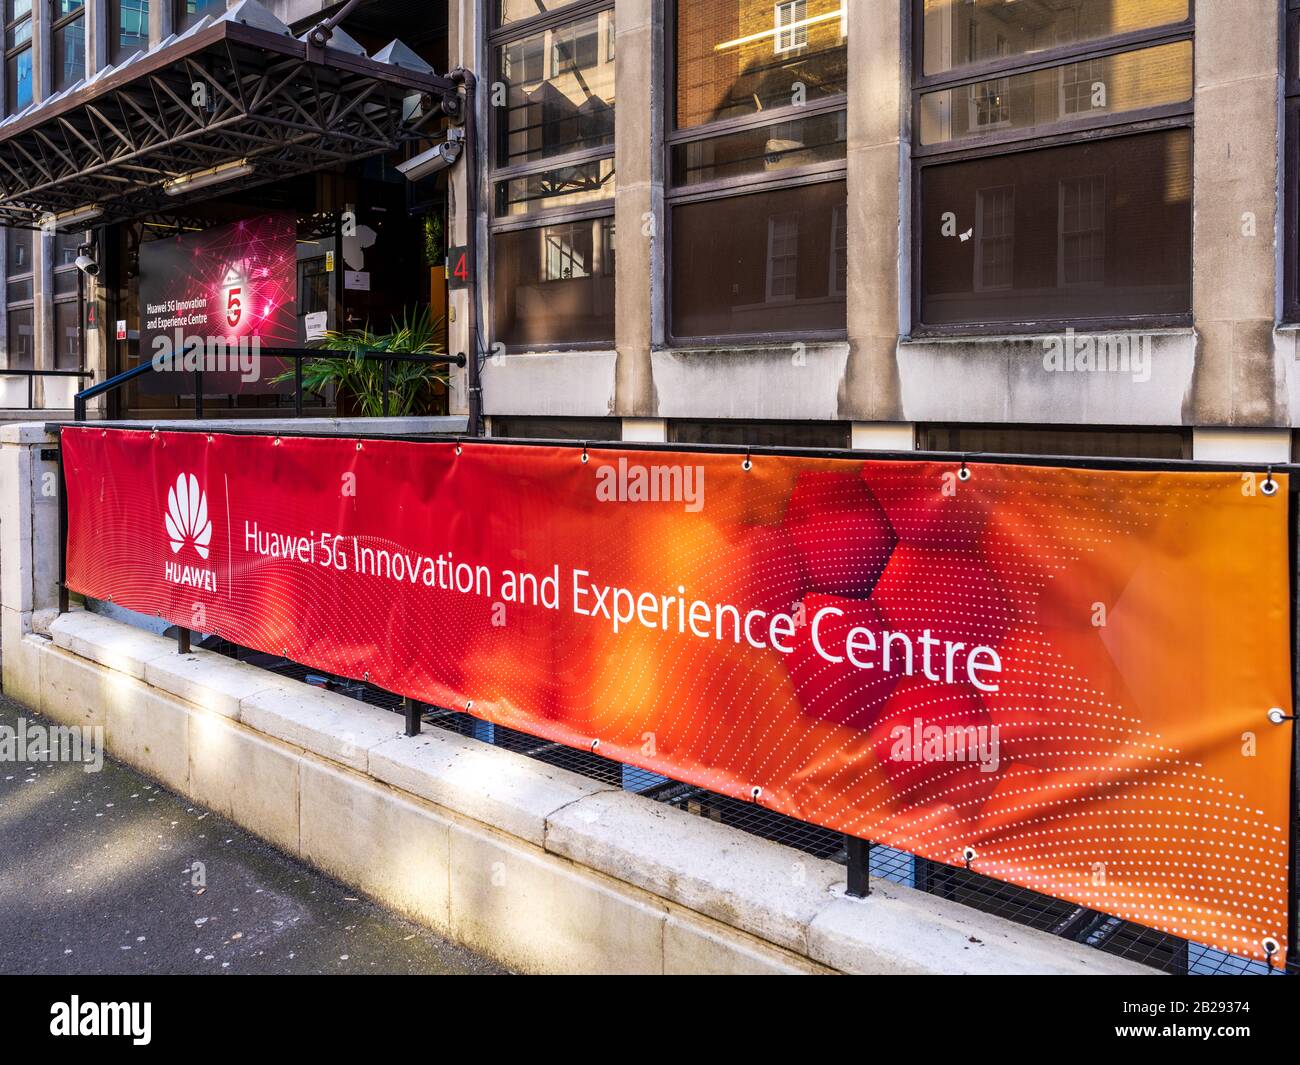 Huawei 5G Innovation and Experience Centre London Stock Photo